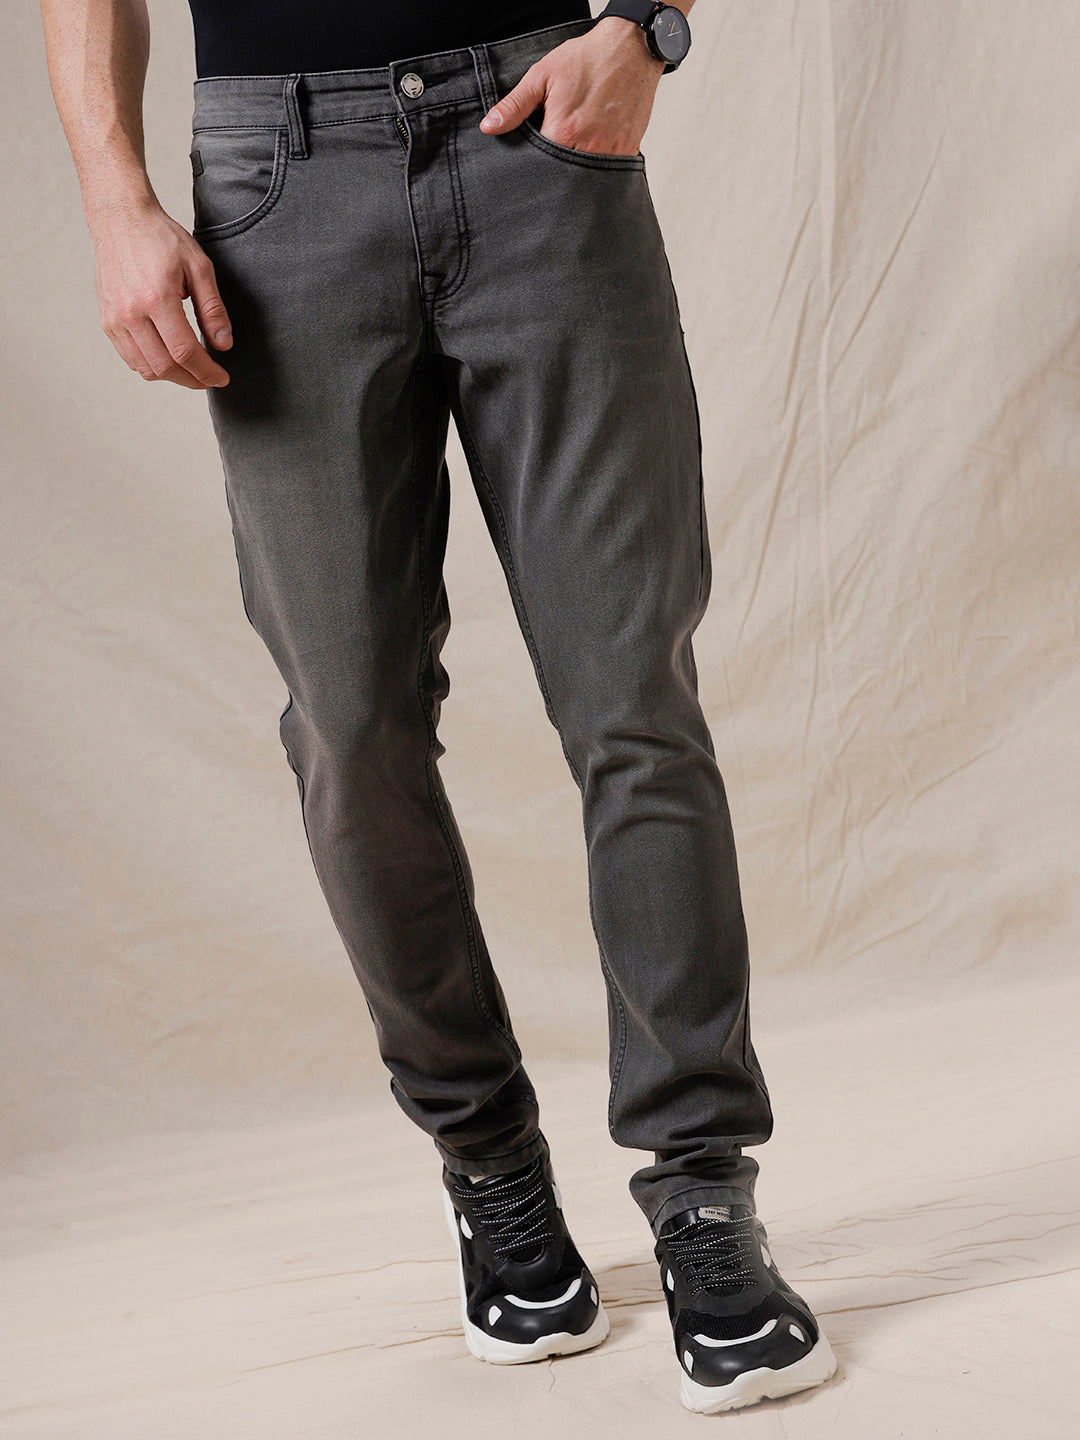 Solid Stone Grey Jeans